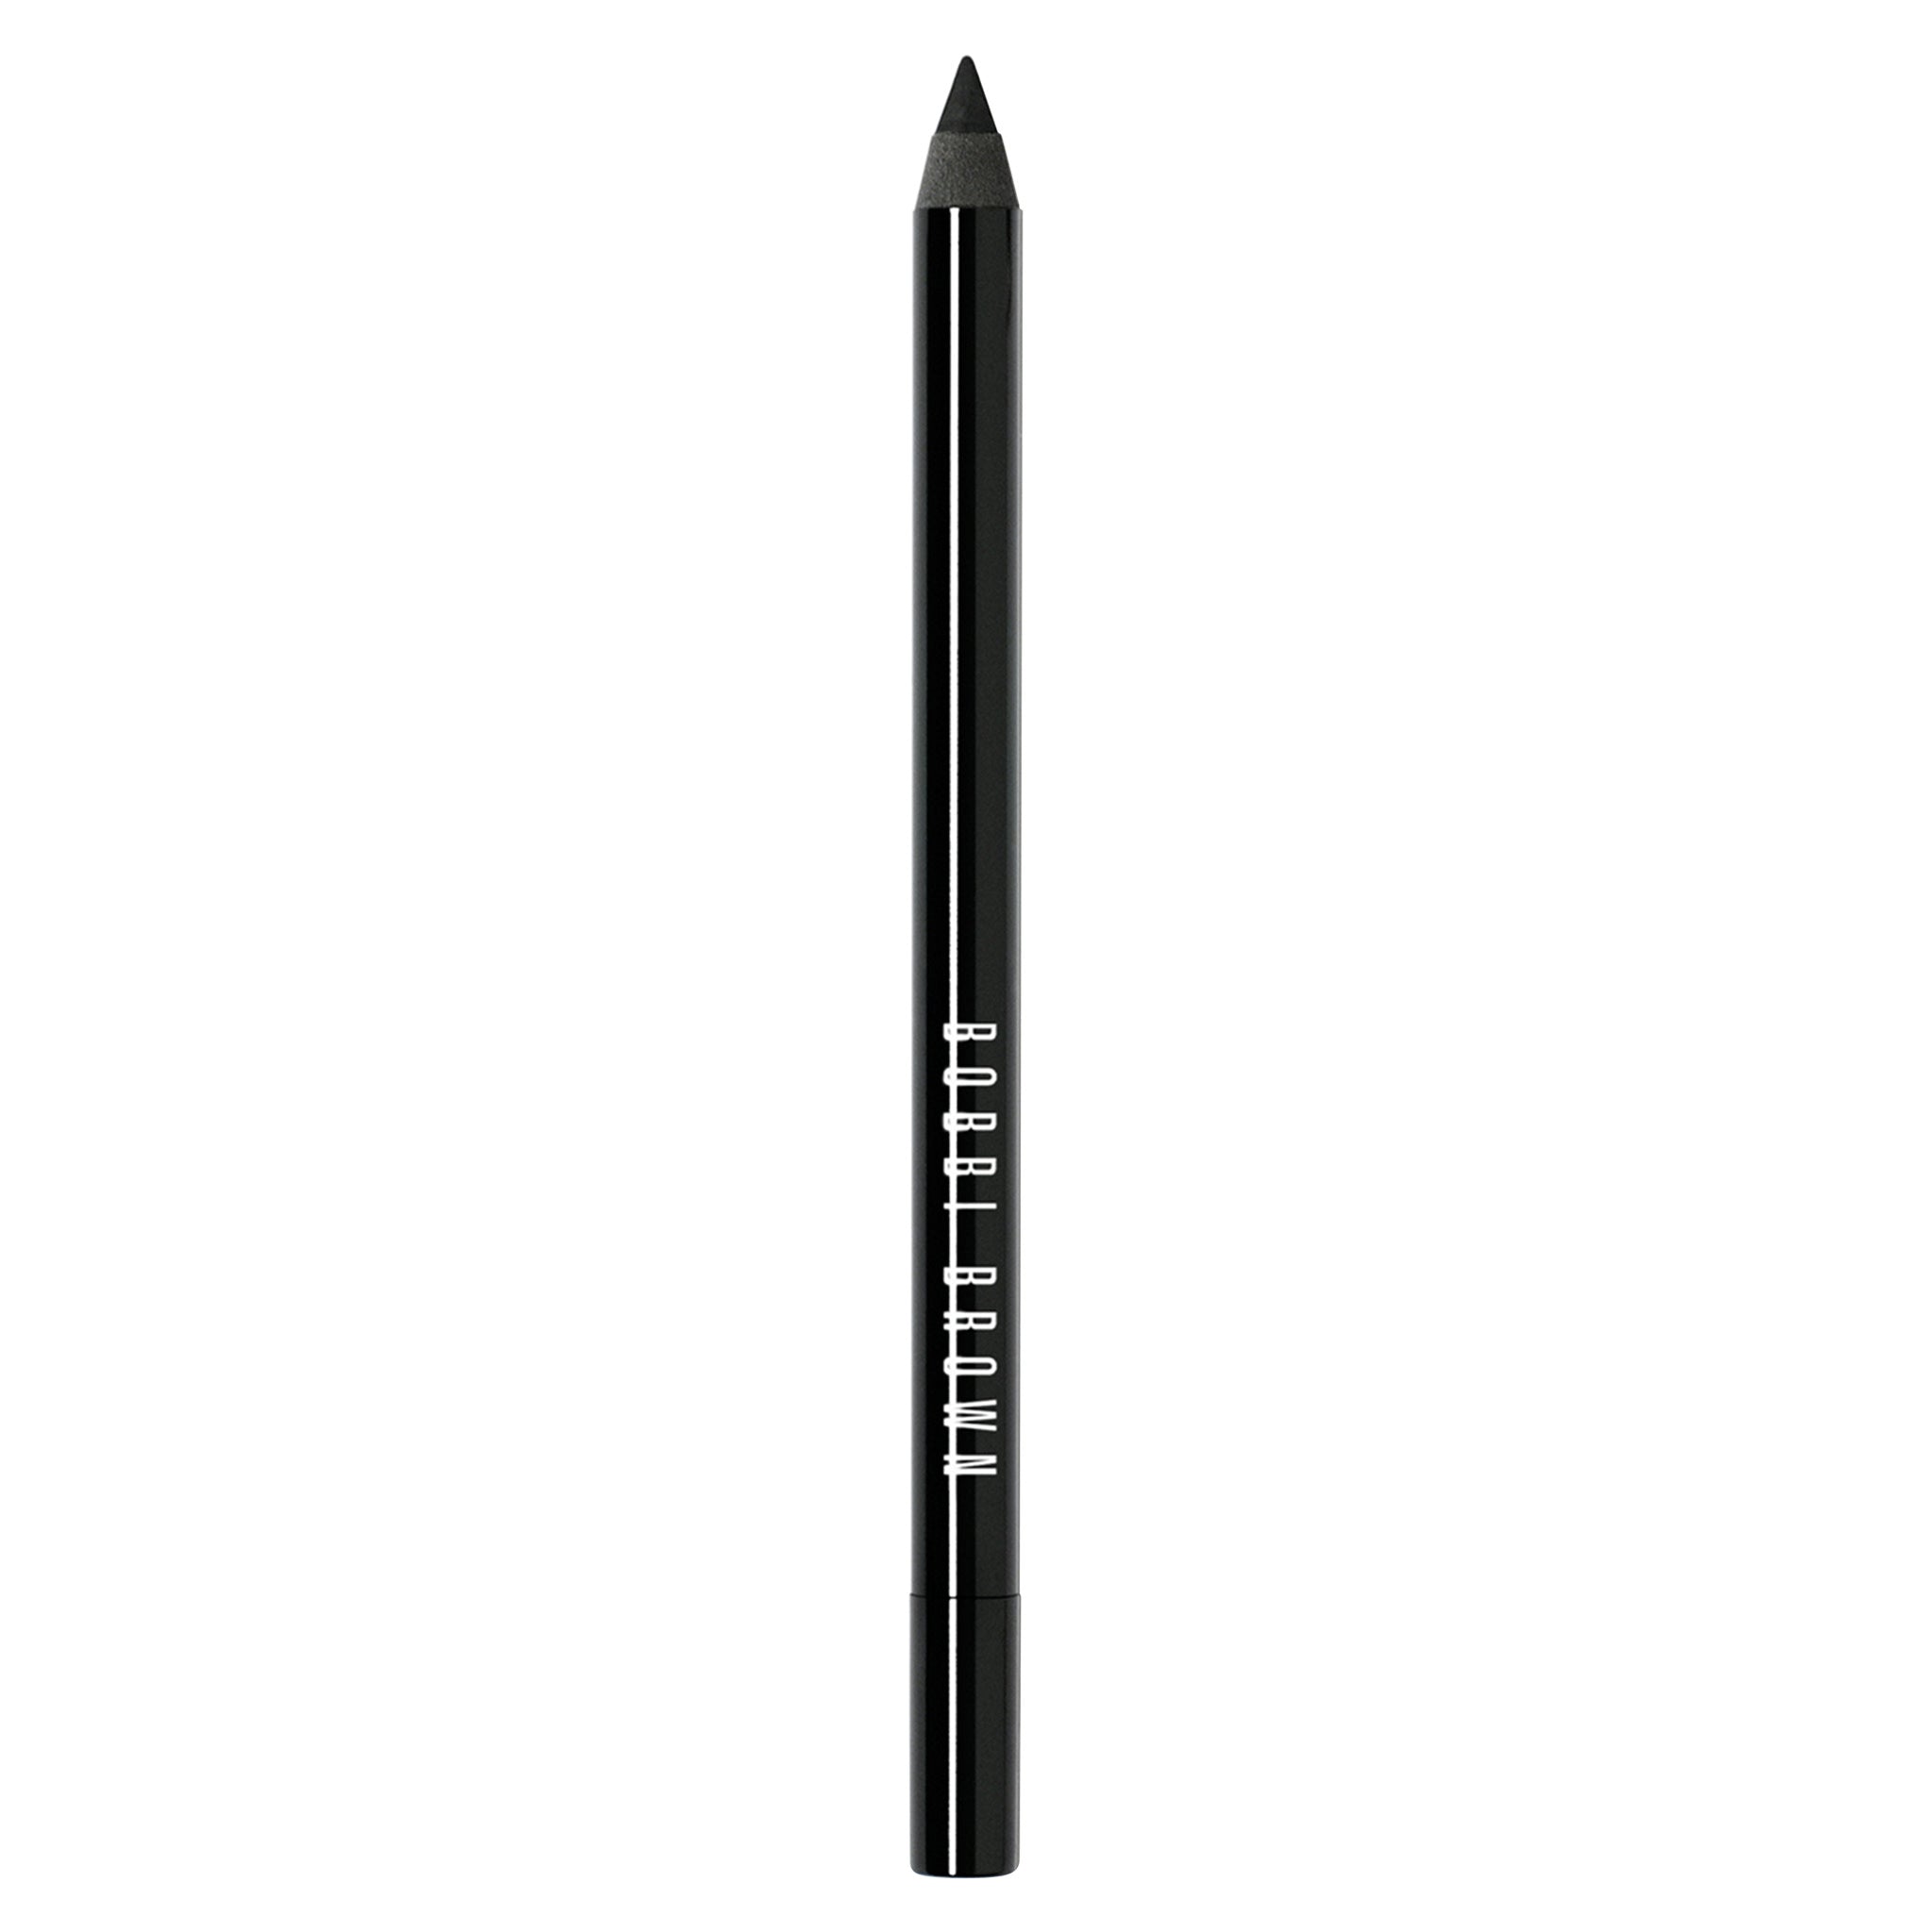 Bobbi Brown Long Wear Eye Pencil Color/Shade variant: Jet main image. This product is in the color black